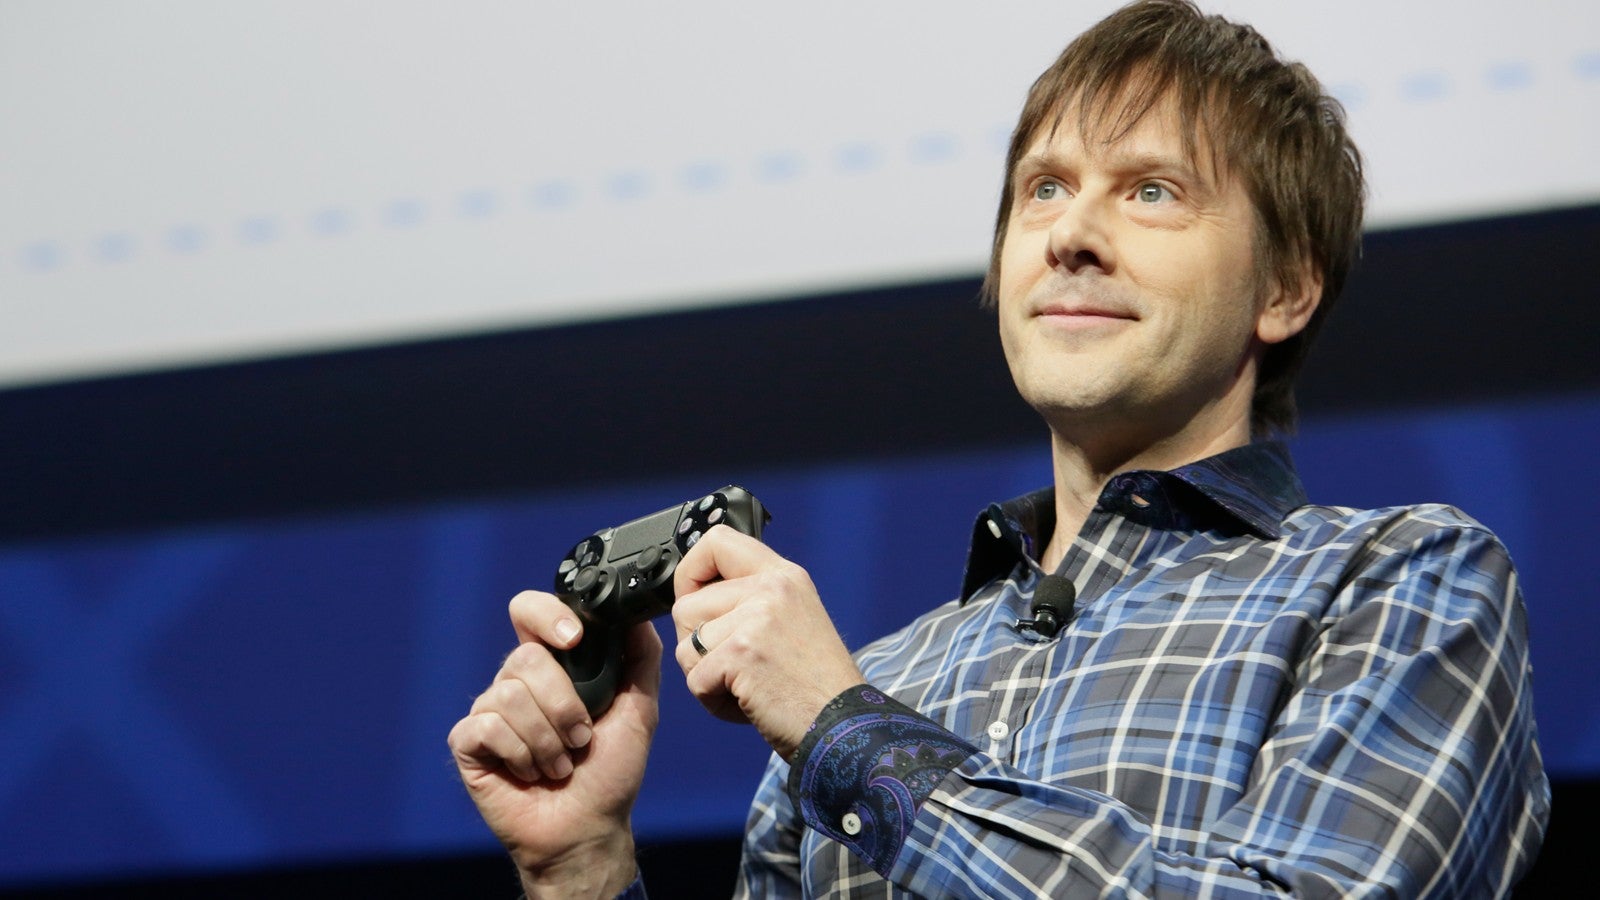 Mark Cerny holds up a DualShock 4 controller during Sony's PS4 reveal event in February of 2013